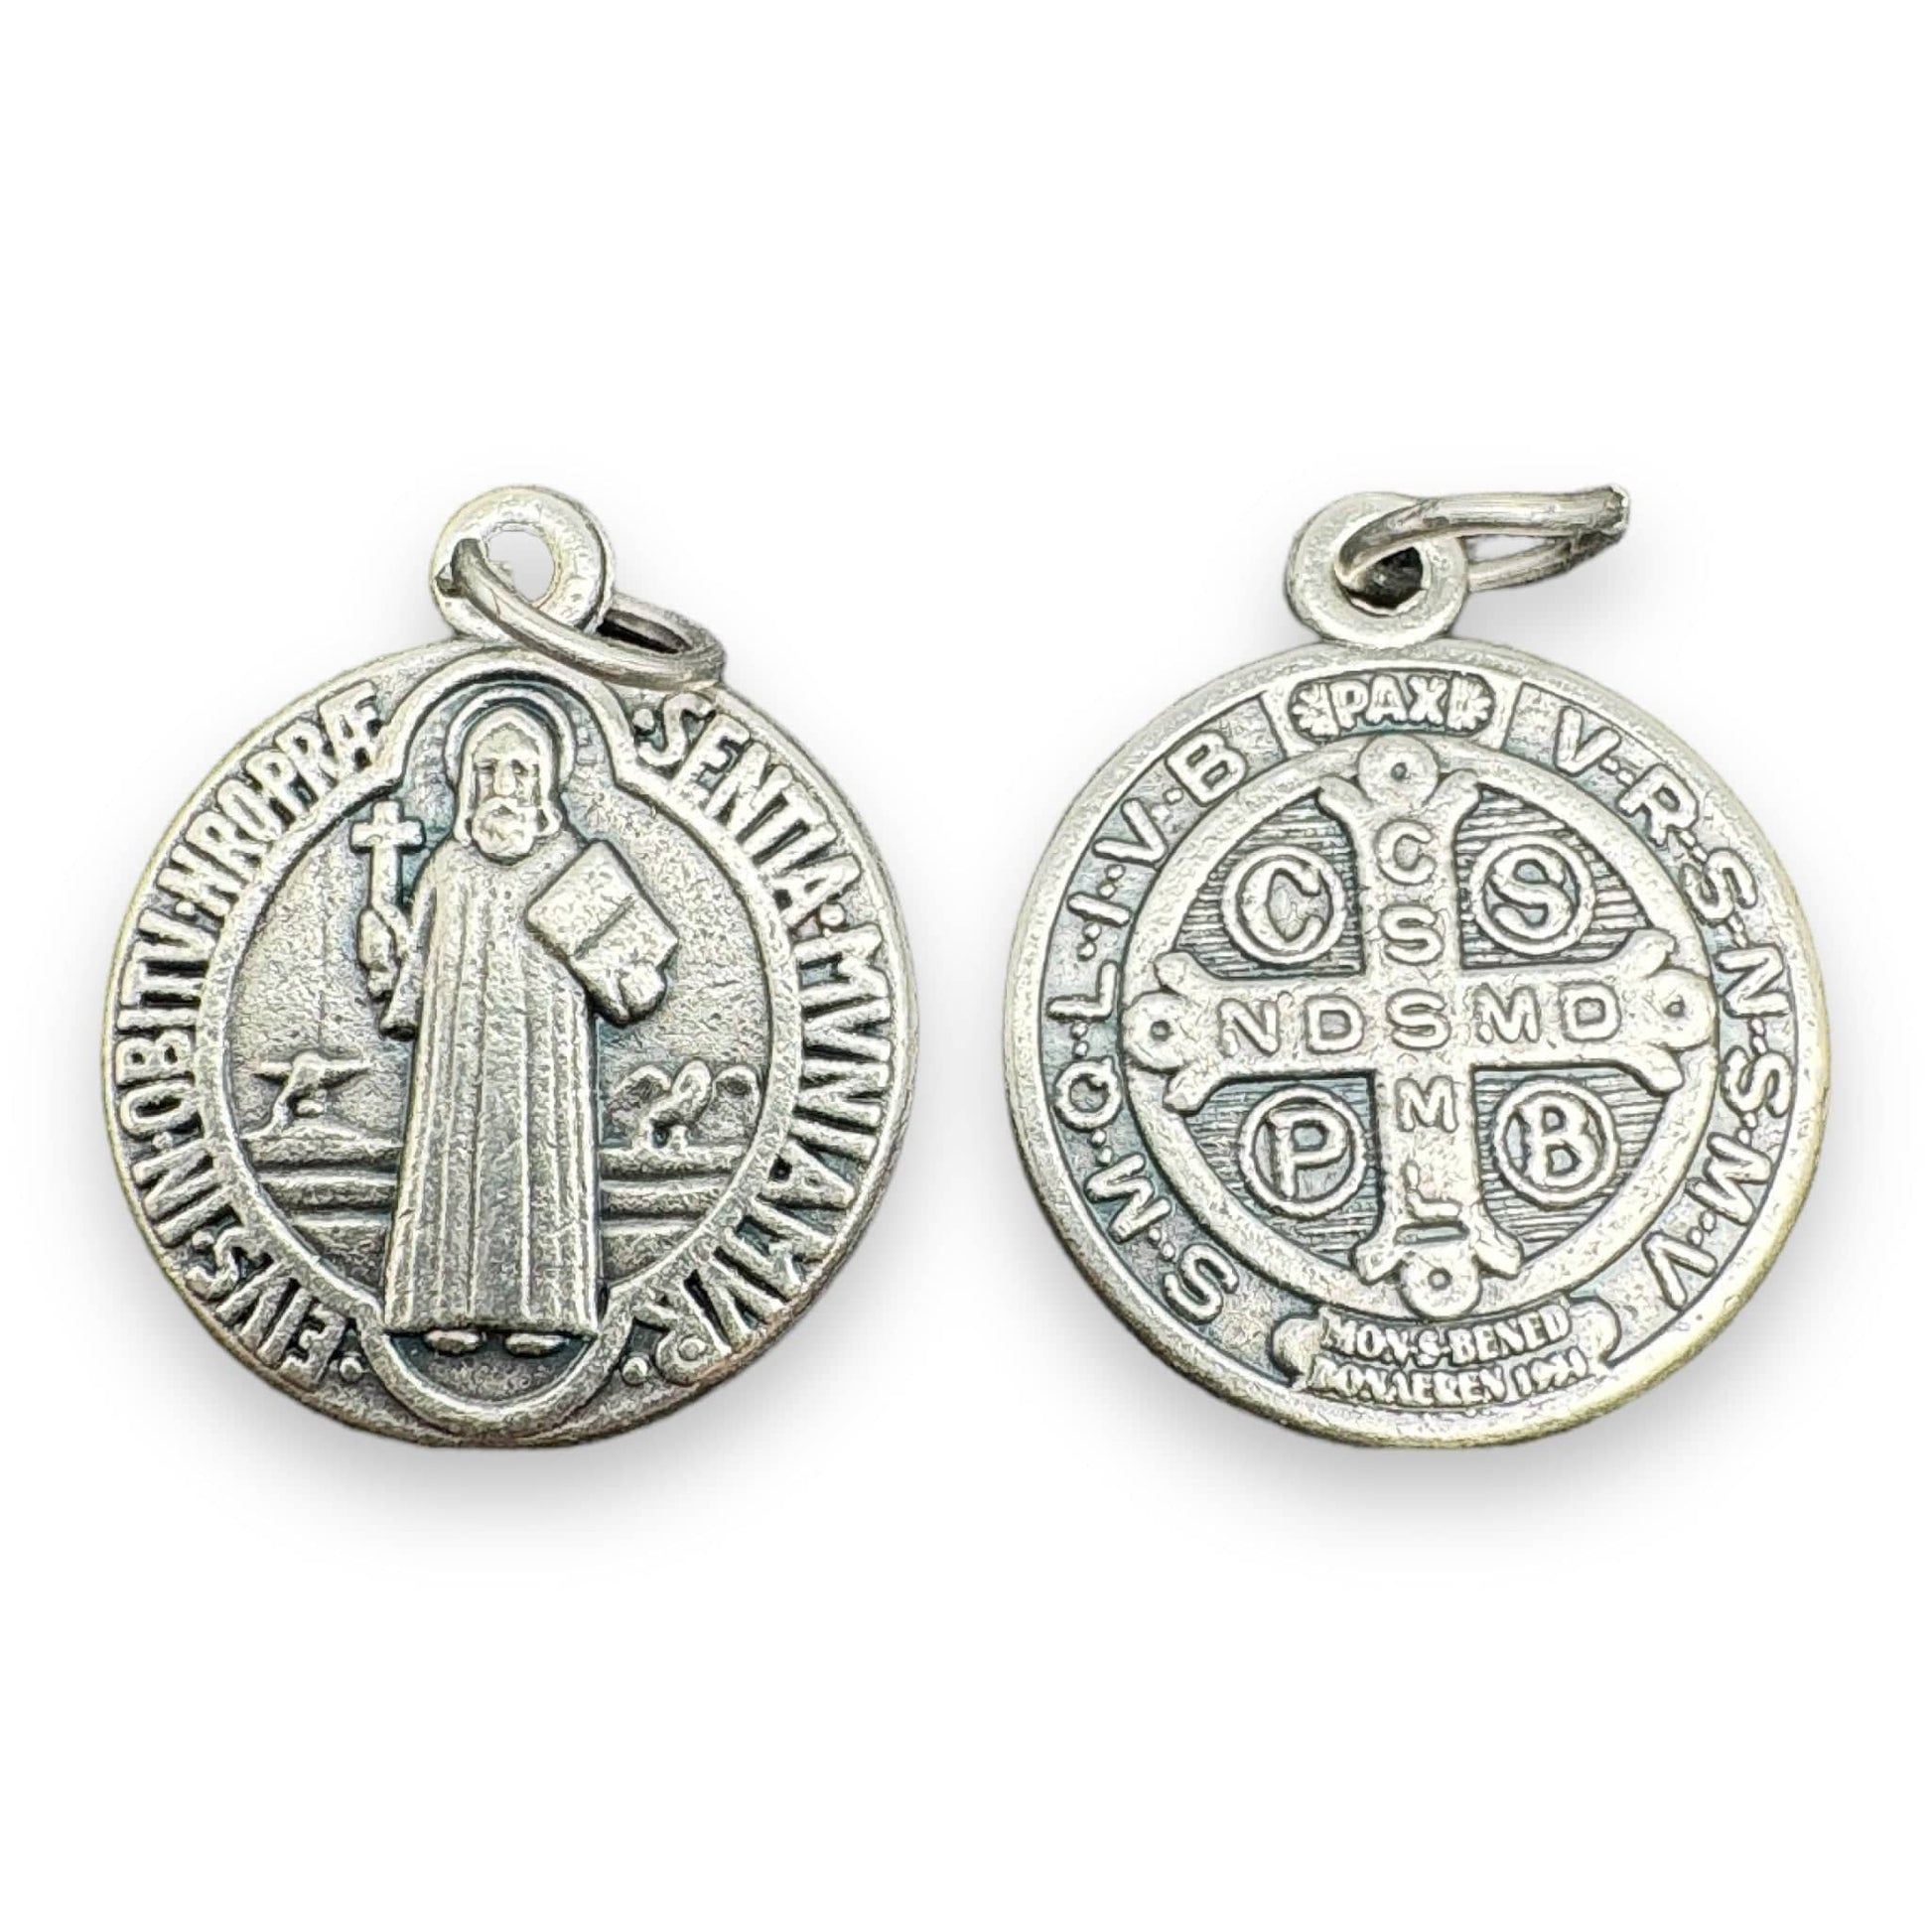 Catholically St Benedict Medal St. Benedict 3/4" Medal - Pendant - Catholic Exorcism - Blessed By Pope